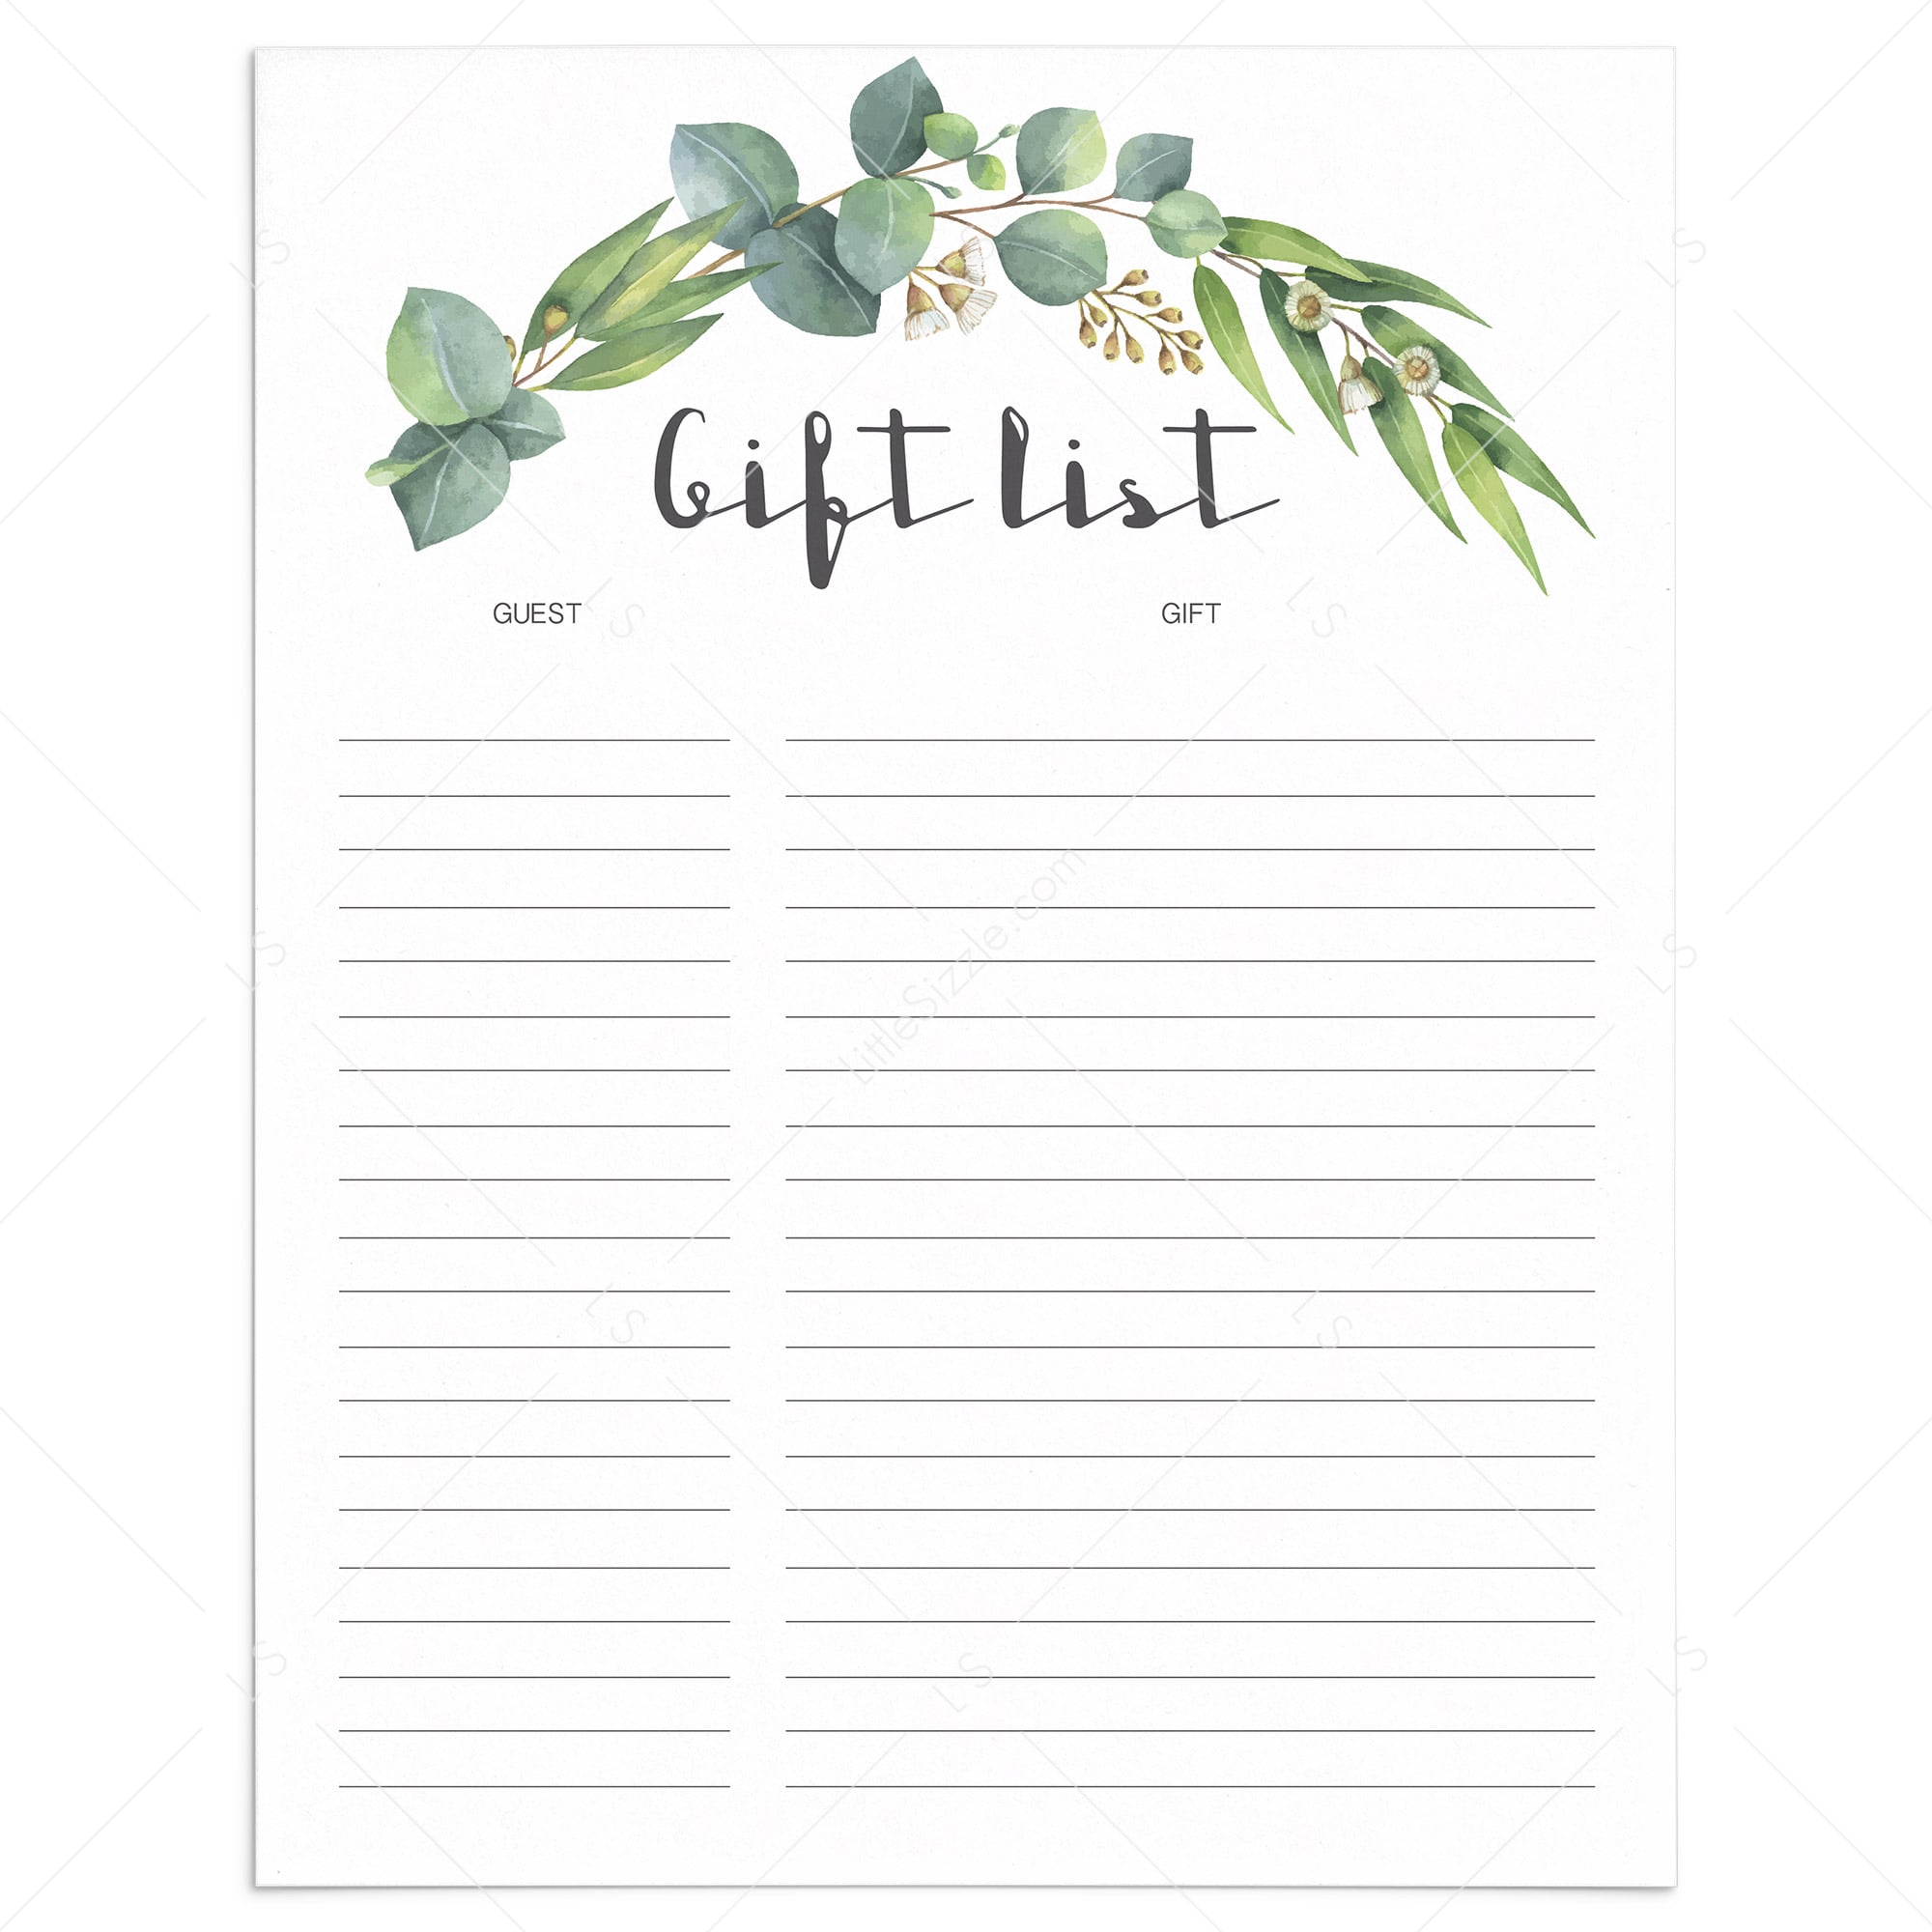 Printable gift tracker with watercolor green leaves by LittleSizzle